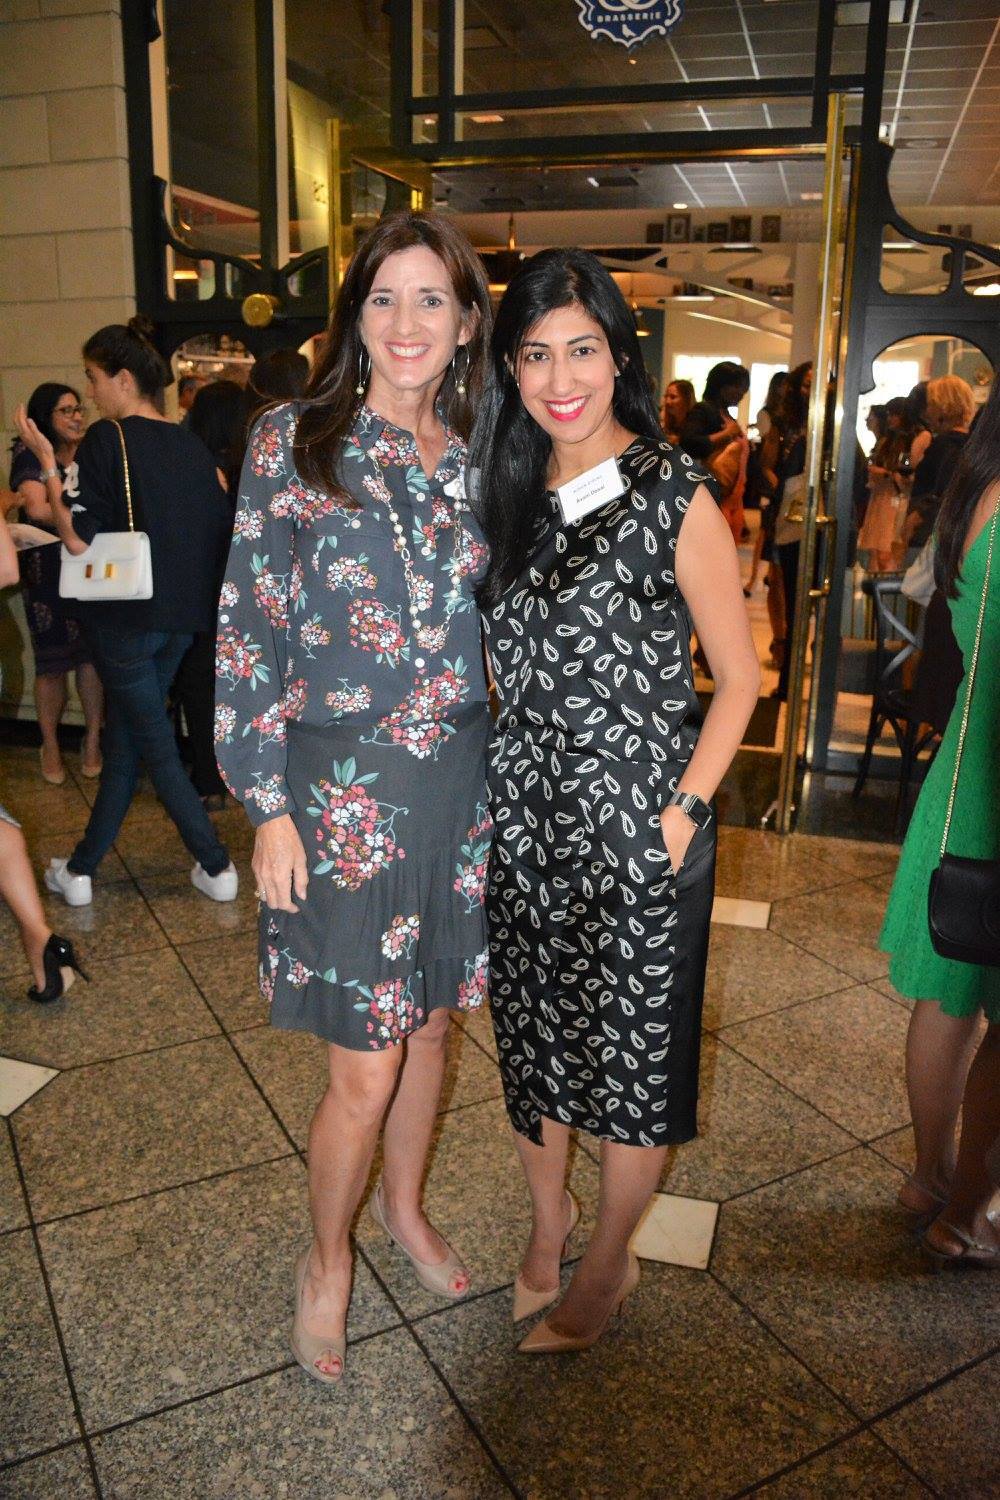 Windermere residents Leslie Hartog, left, and Avani Desai are co-chairs of the Central Florida Foundation giving circle 100 Women Strong.